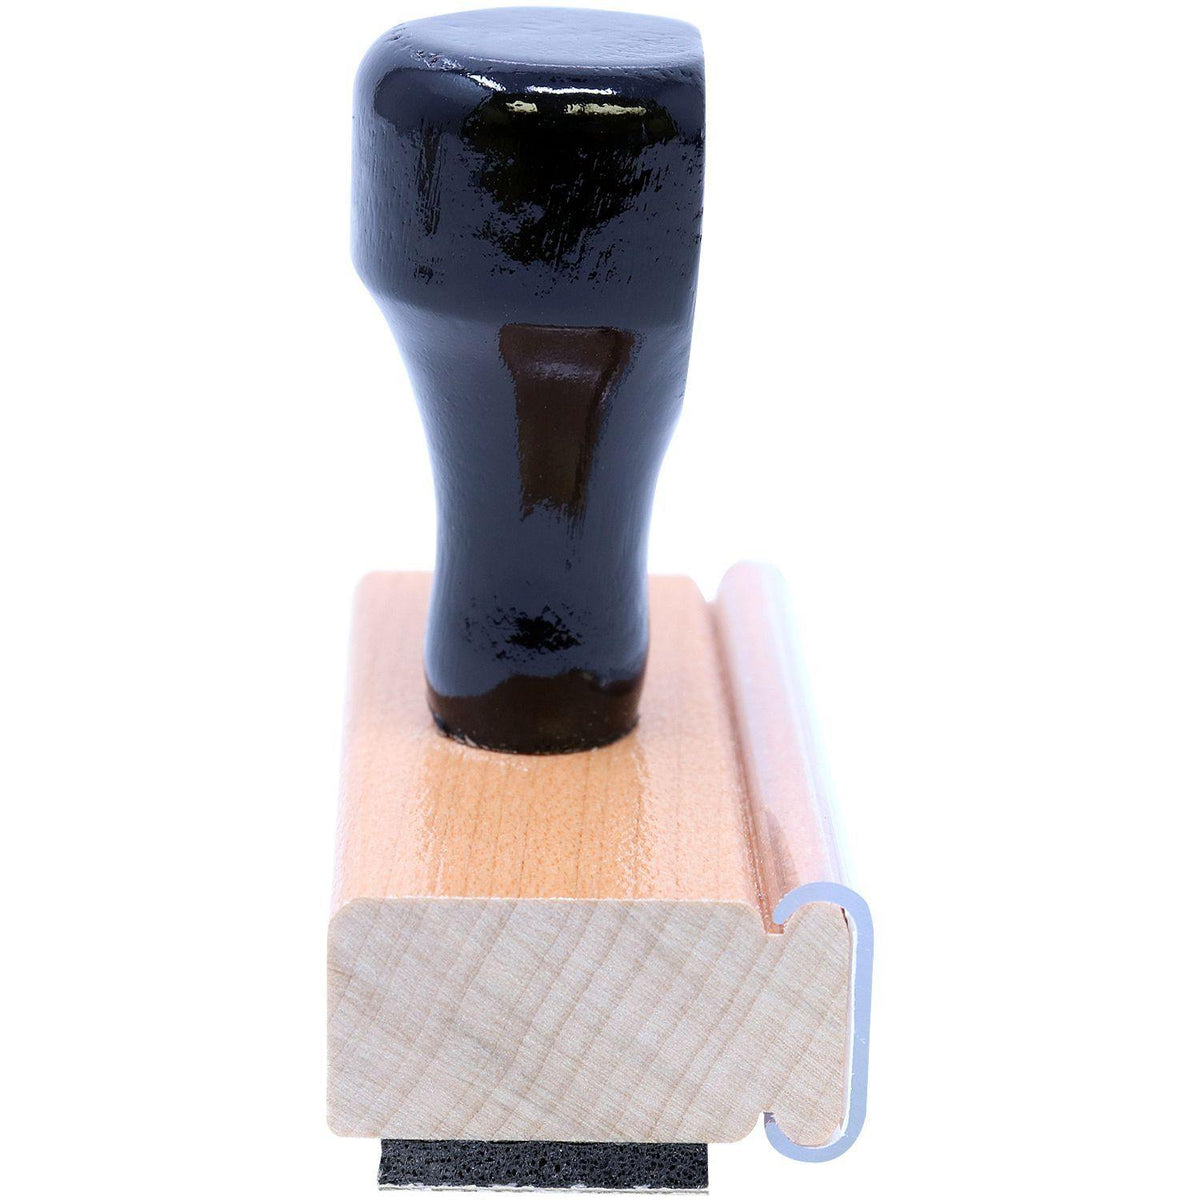 Large Shadow Copy Rubber Stamp - Engineer Seal Stamps - Brand_Acorn, Impression Size_Large, Stamp Type_Regular Stamp, Type of Use_General, Type of Use_Office